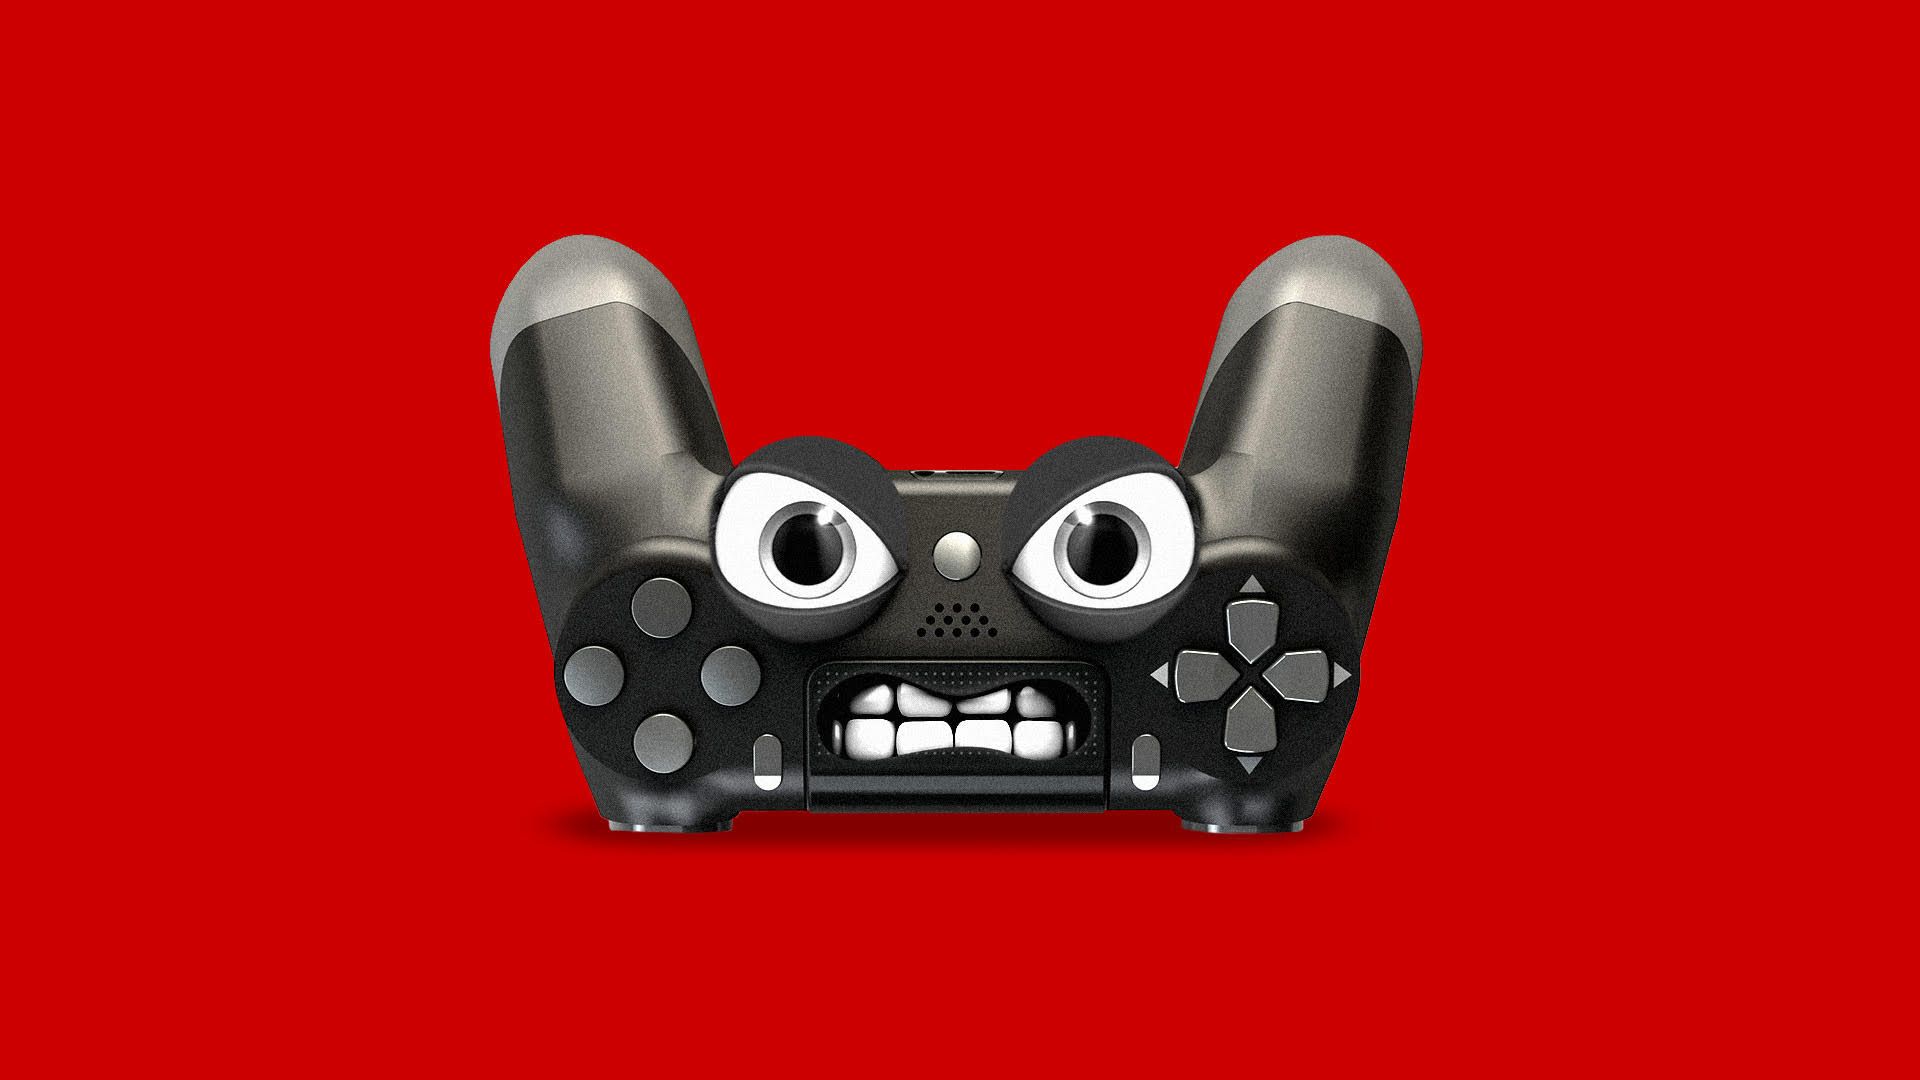 A video game controller with an angry face